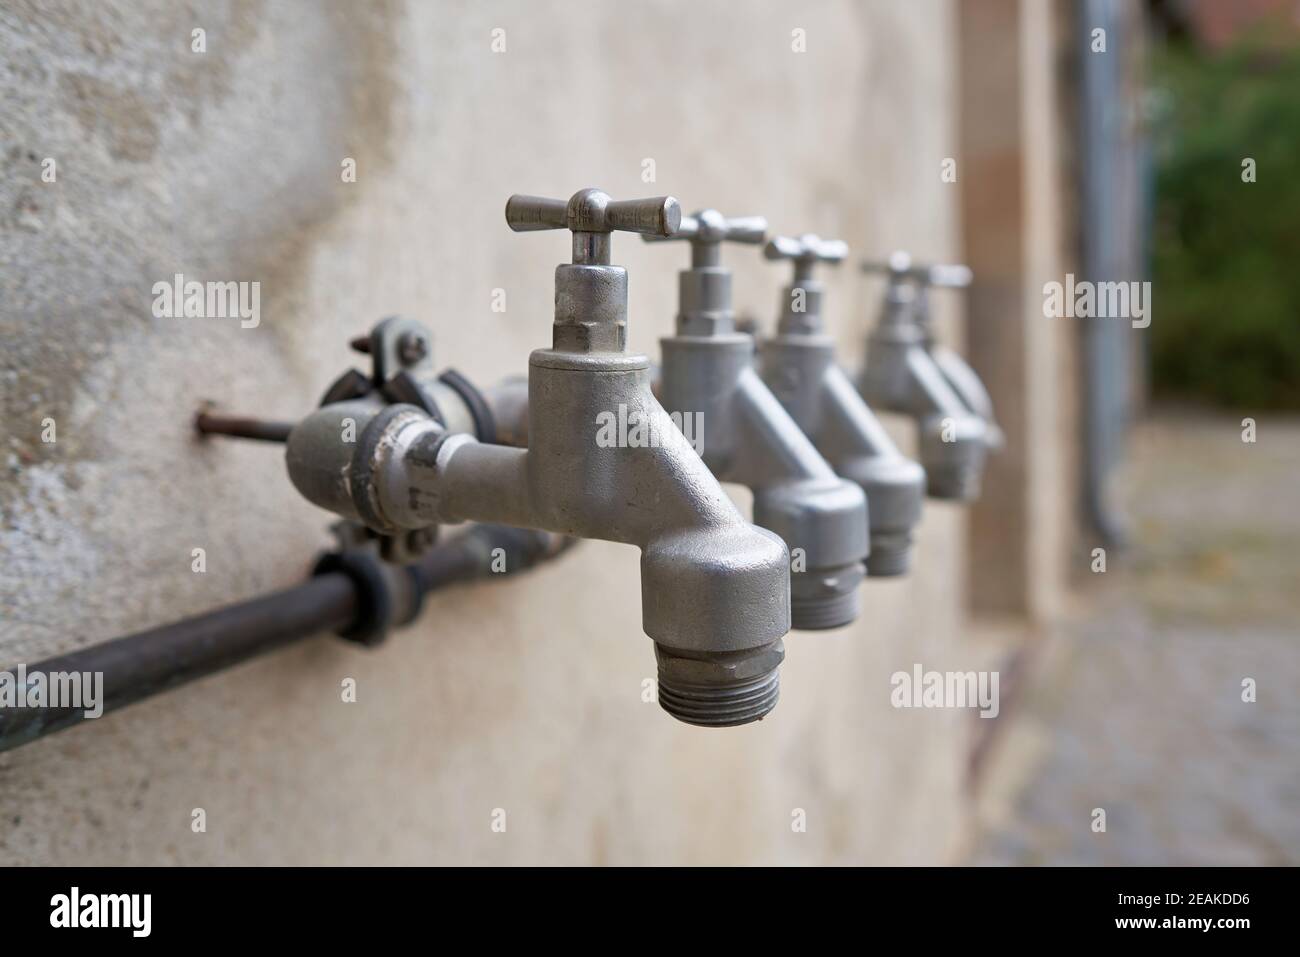 Taps for water supply in the garden on the facade of a house Stock Photo